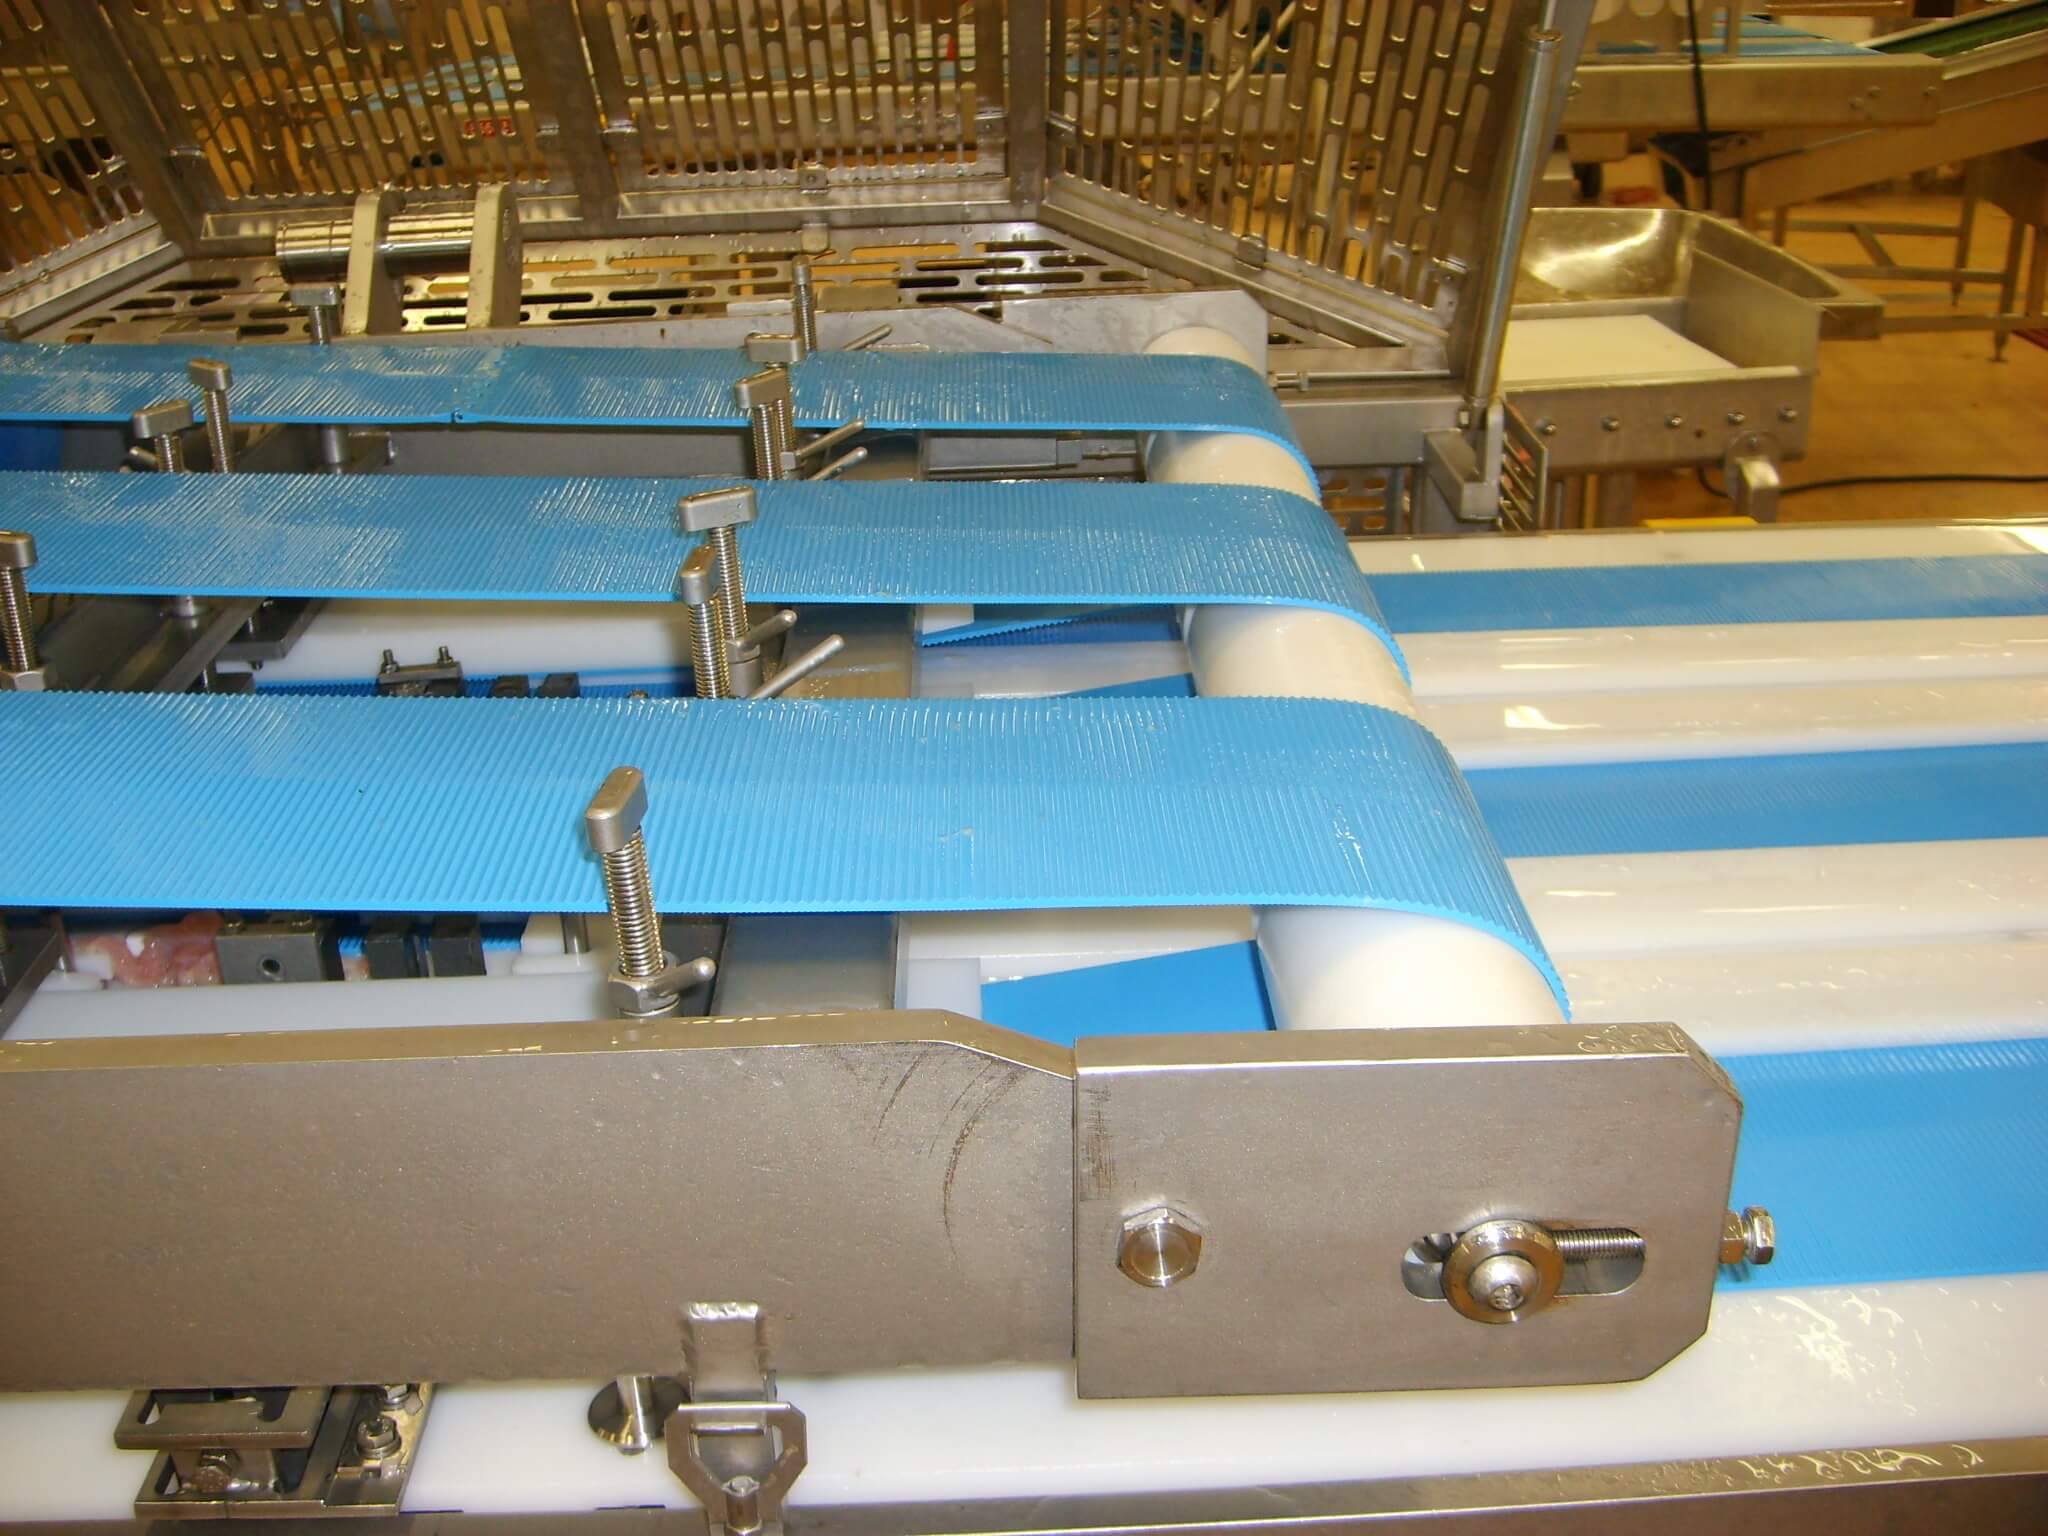 Plate Conveyor Belt for Sorting, Drying or Conveying Brewery or Bread